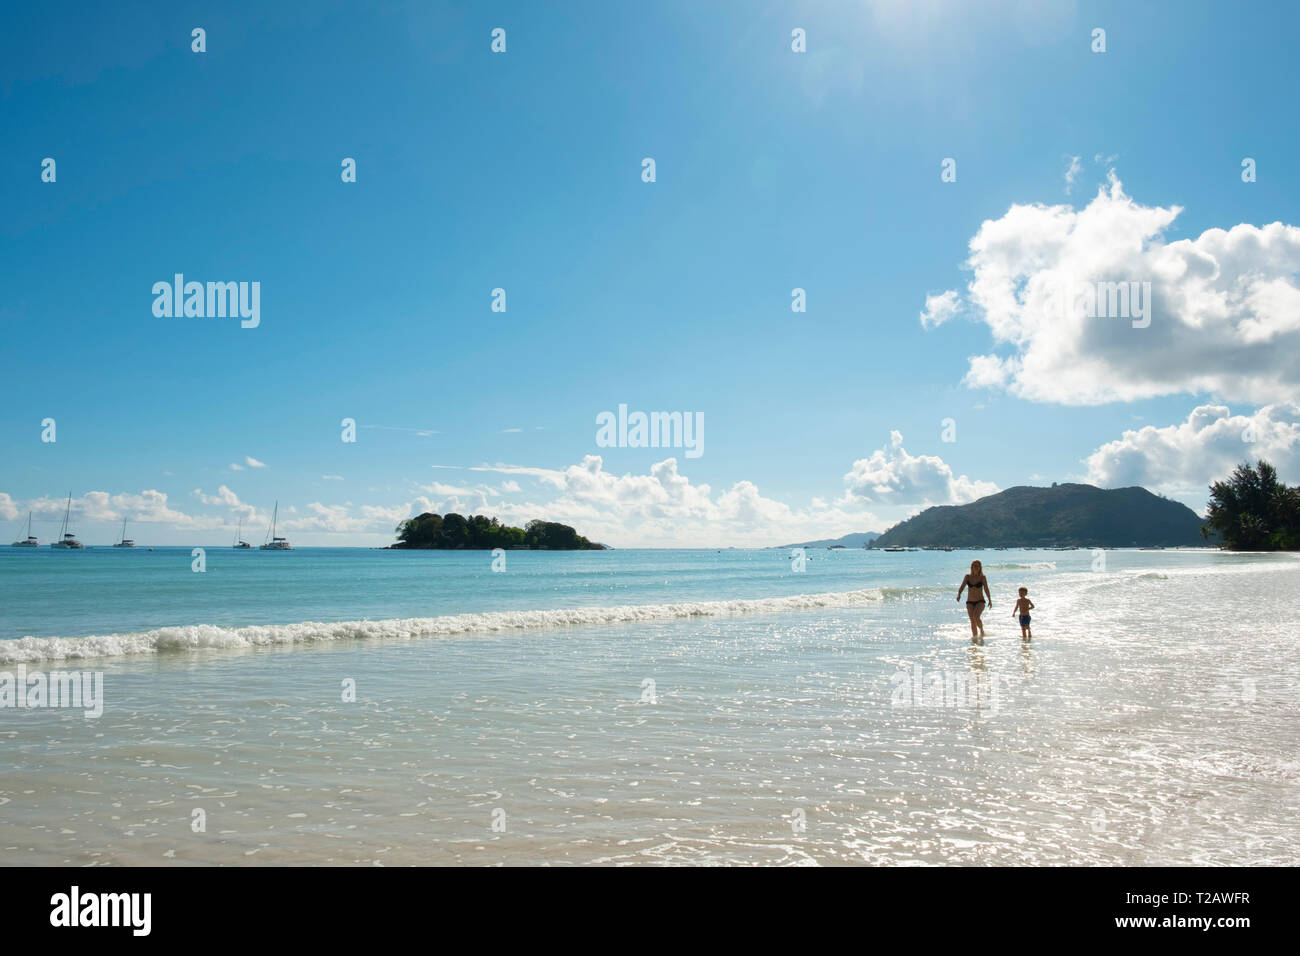 A mother and son walking in the surf on Anse Volbert, Praslin, the Seychelles Stock Photo